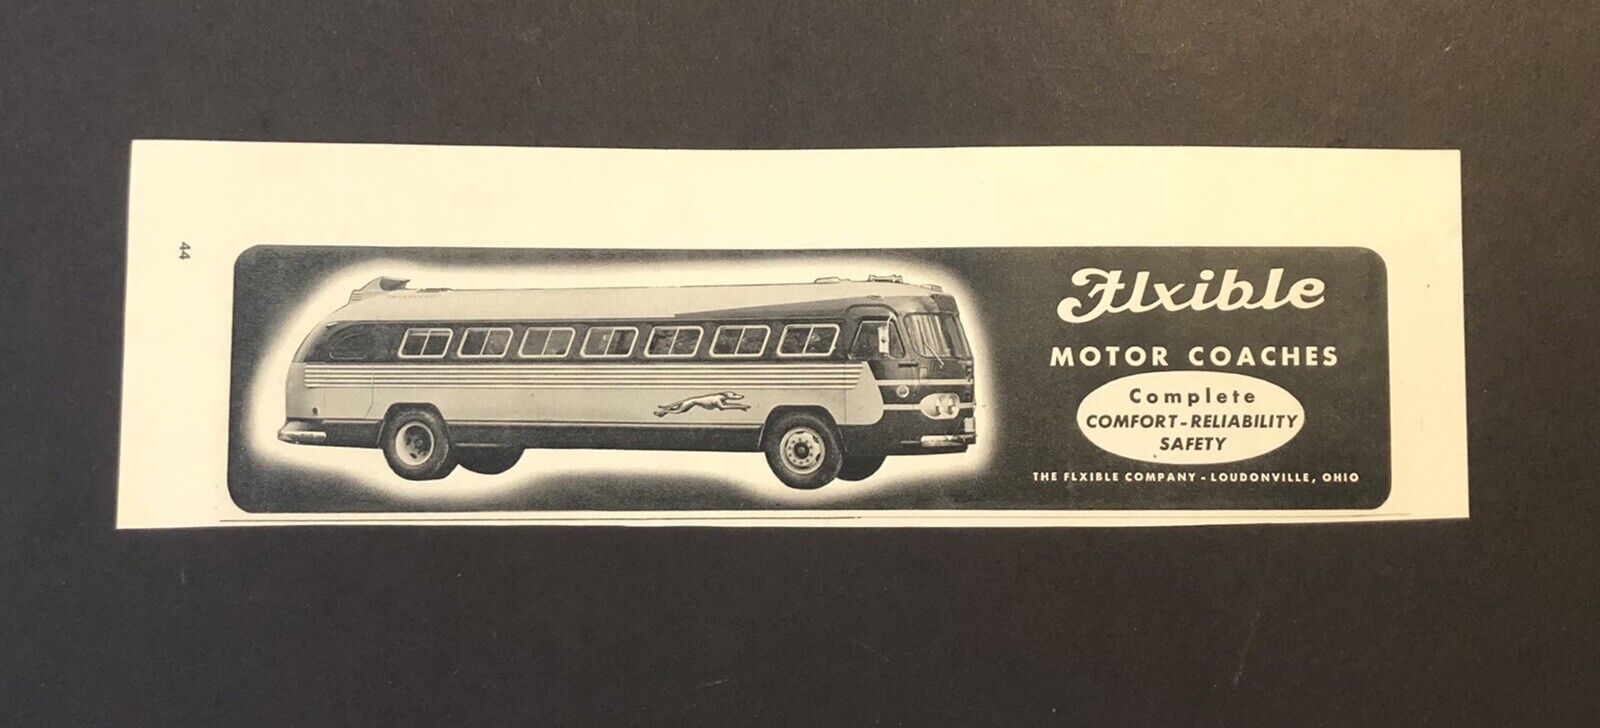 1950’s The Flxible Company Motor Coaches Magazine Ad